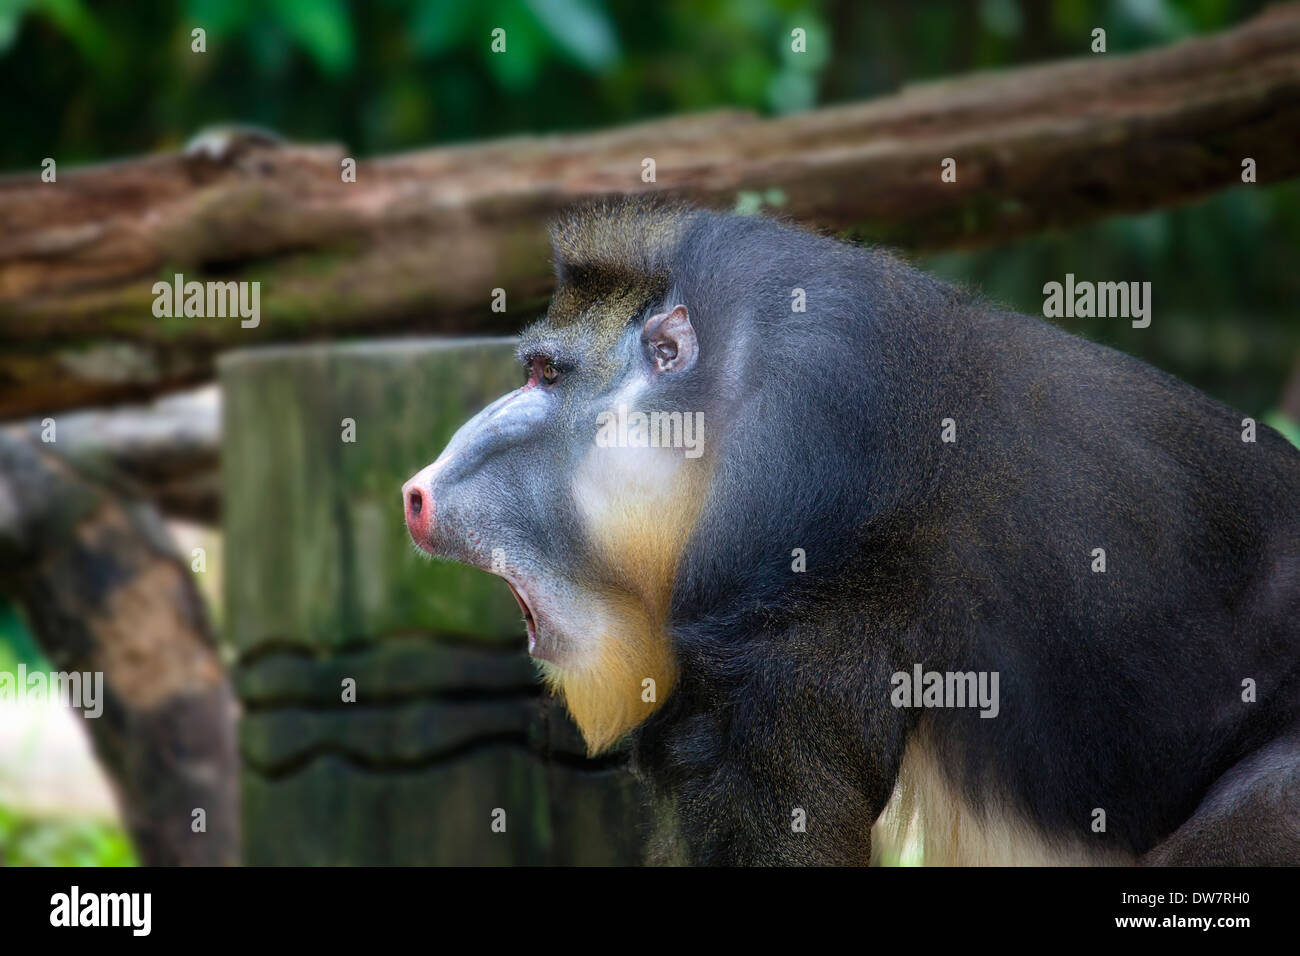 Male Mandrill Baboon Primate Calling Out Portrait Stock Photo